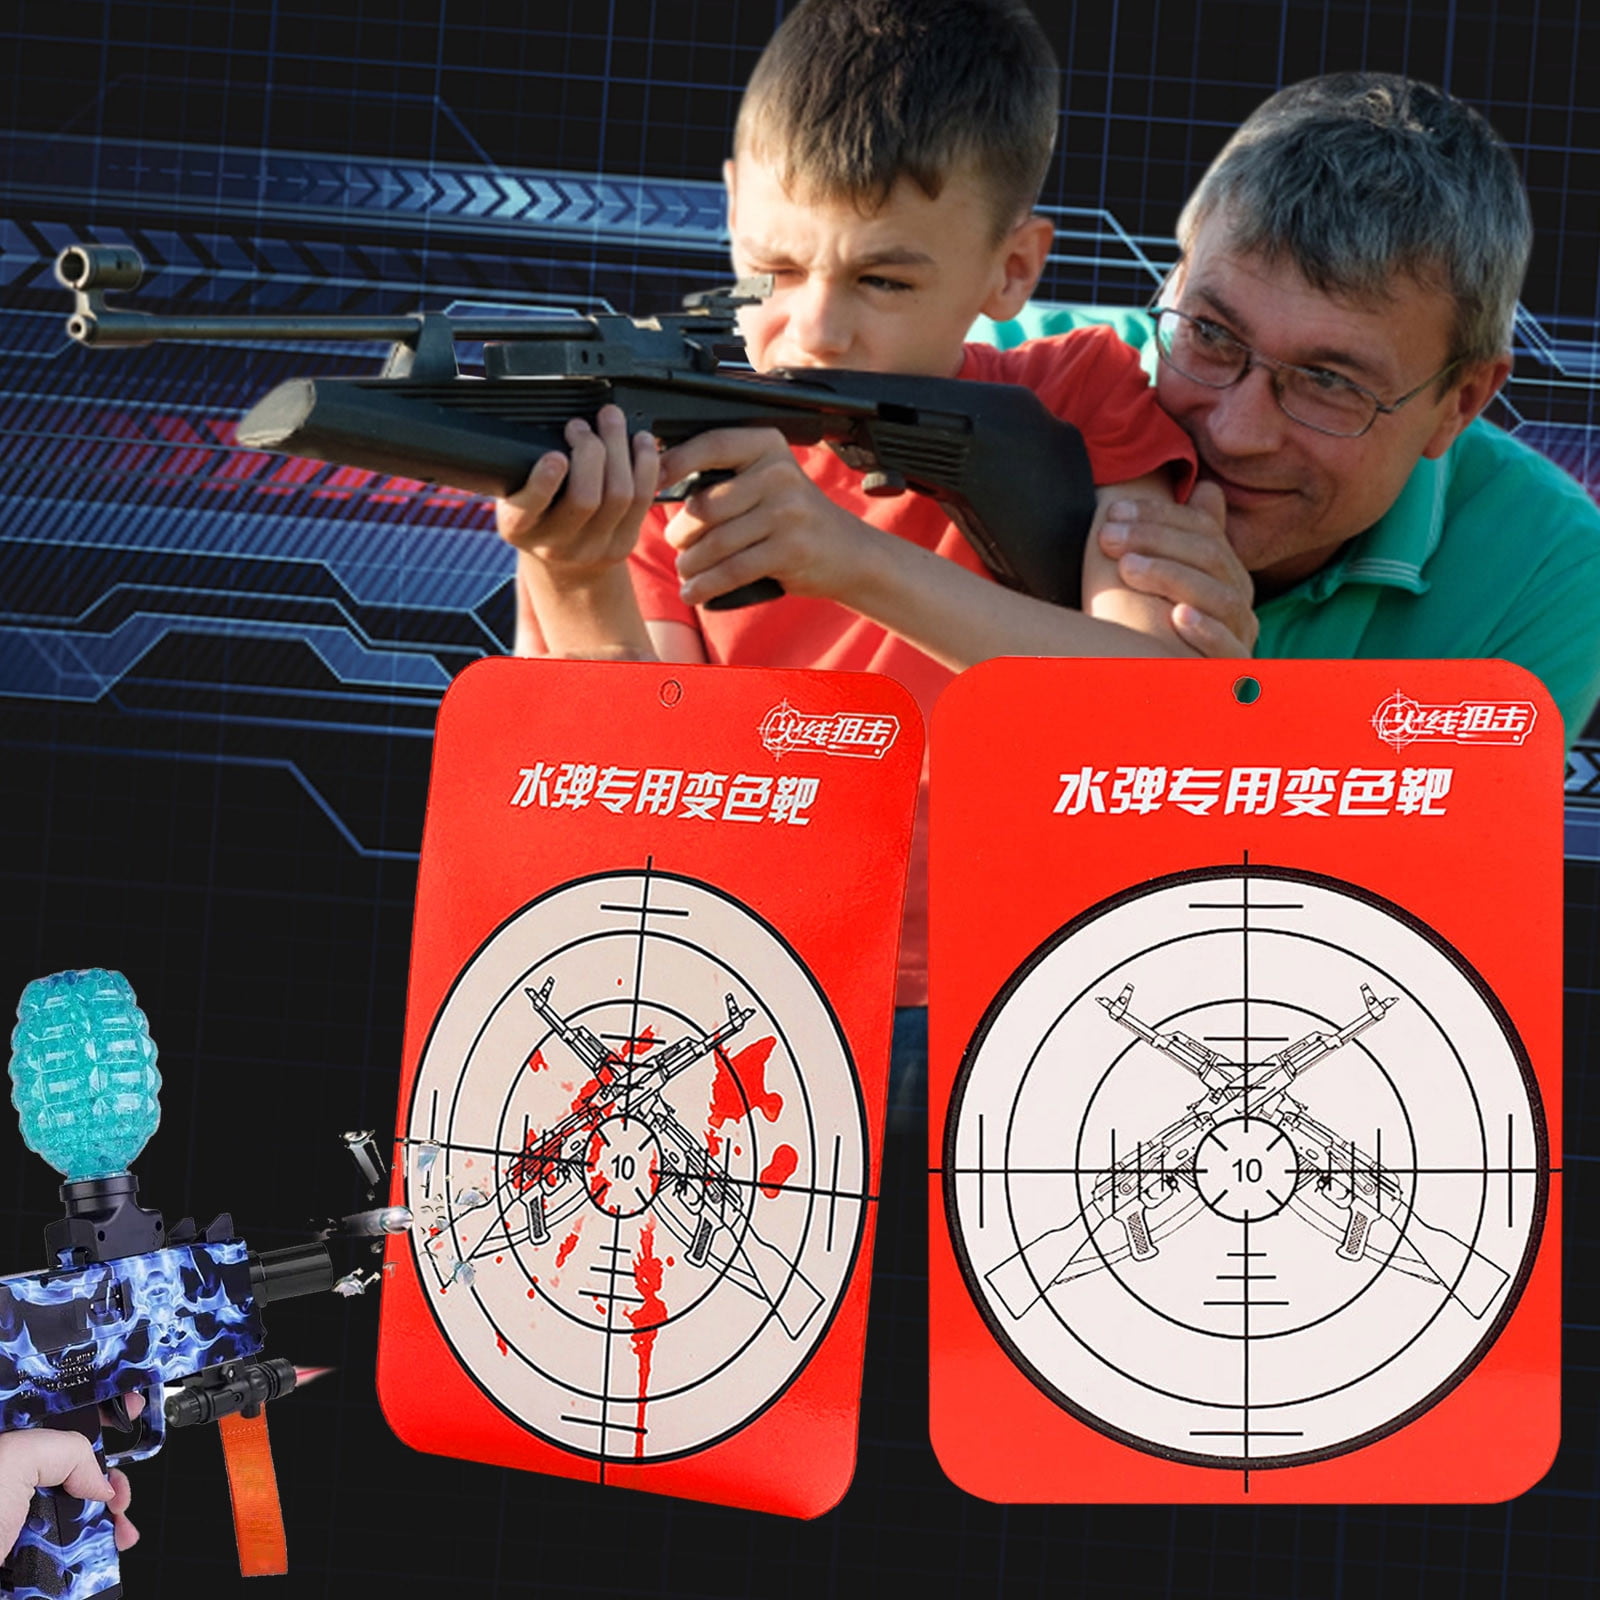 Water Shooting Cardboard For Kids Changing Paper Paper Target Color Targets Shooting Toy Training Accessories Game Outdoor Toys